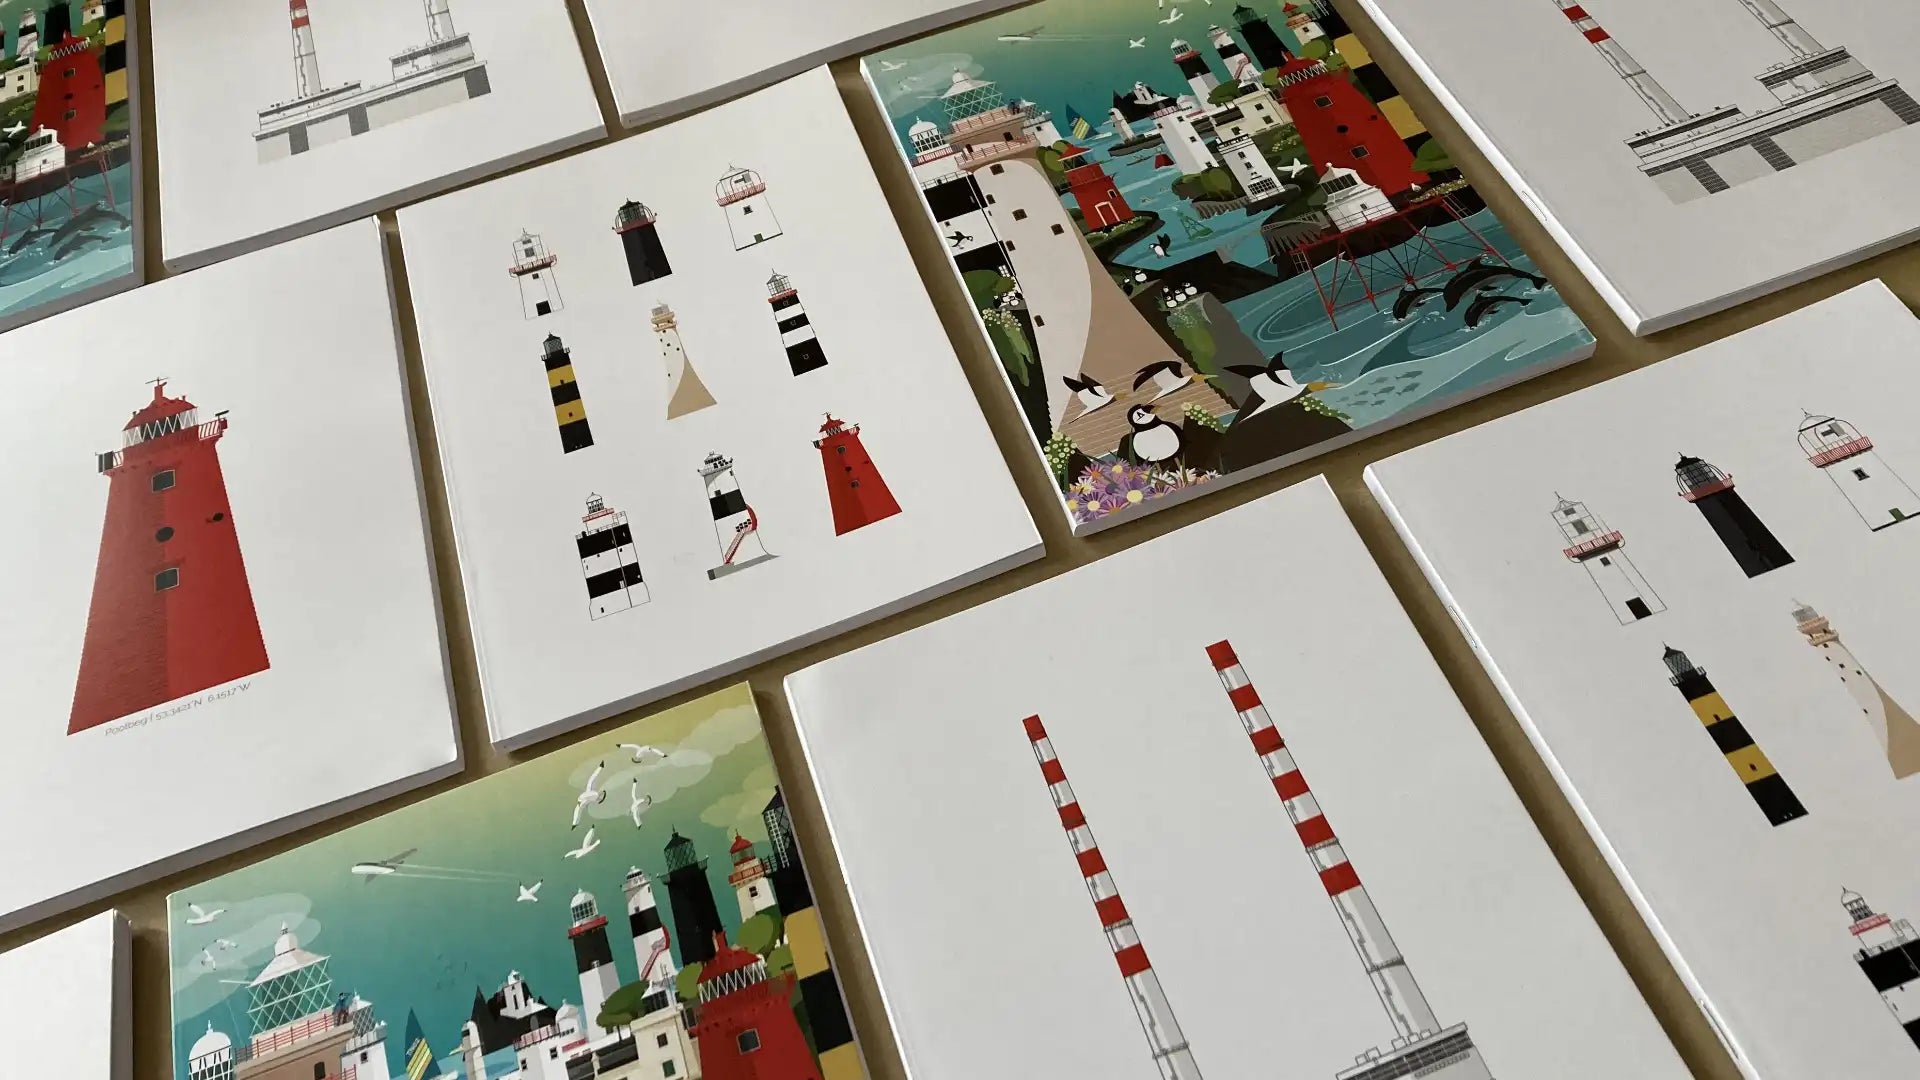 A selction of notebooks displaying their covers featuring lighthouses of ireland and the poolbeg chimneys.